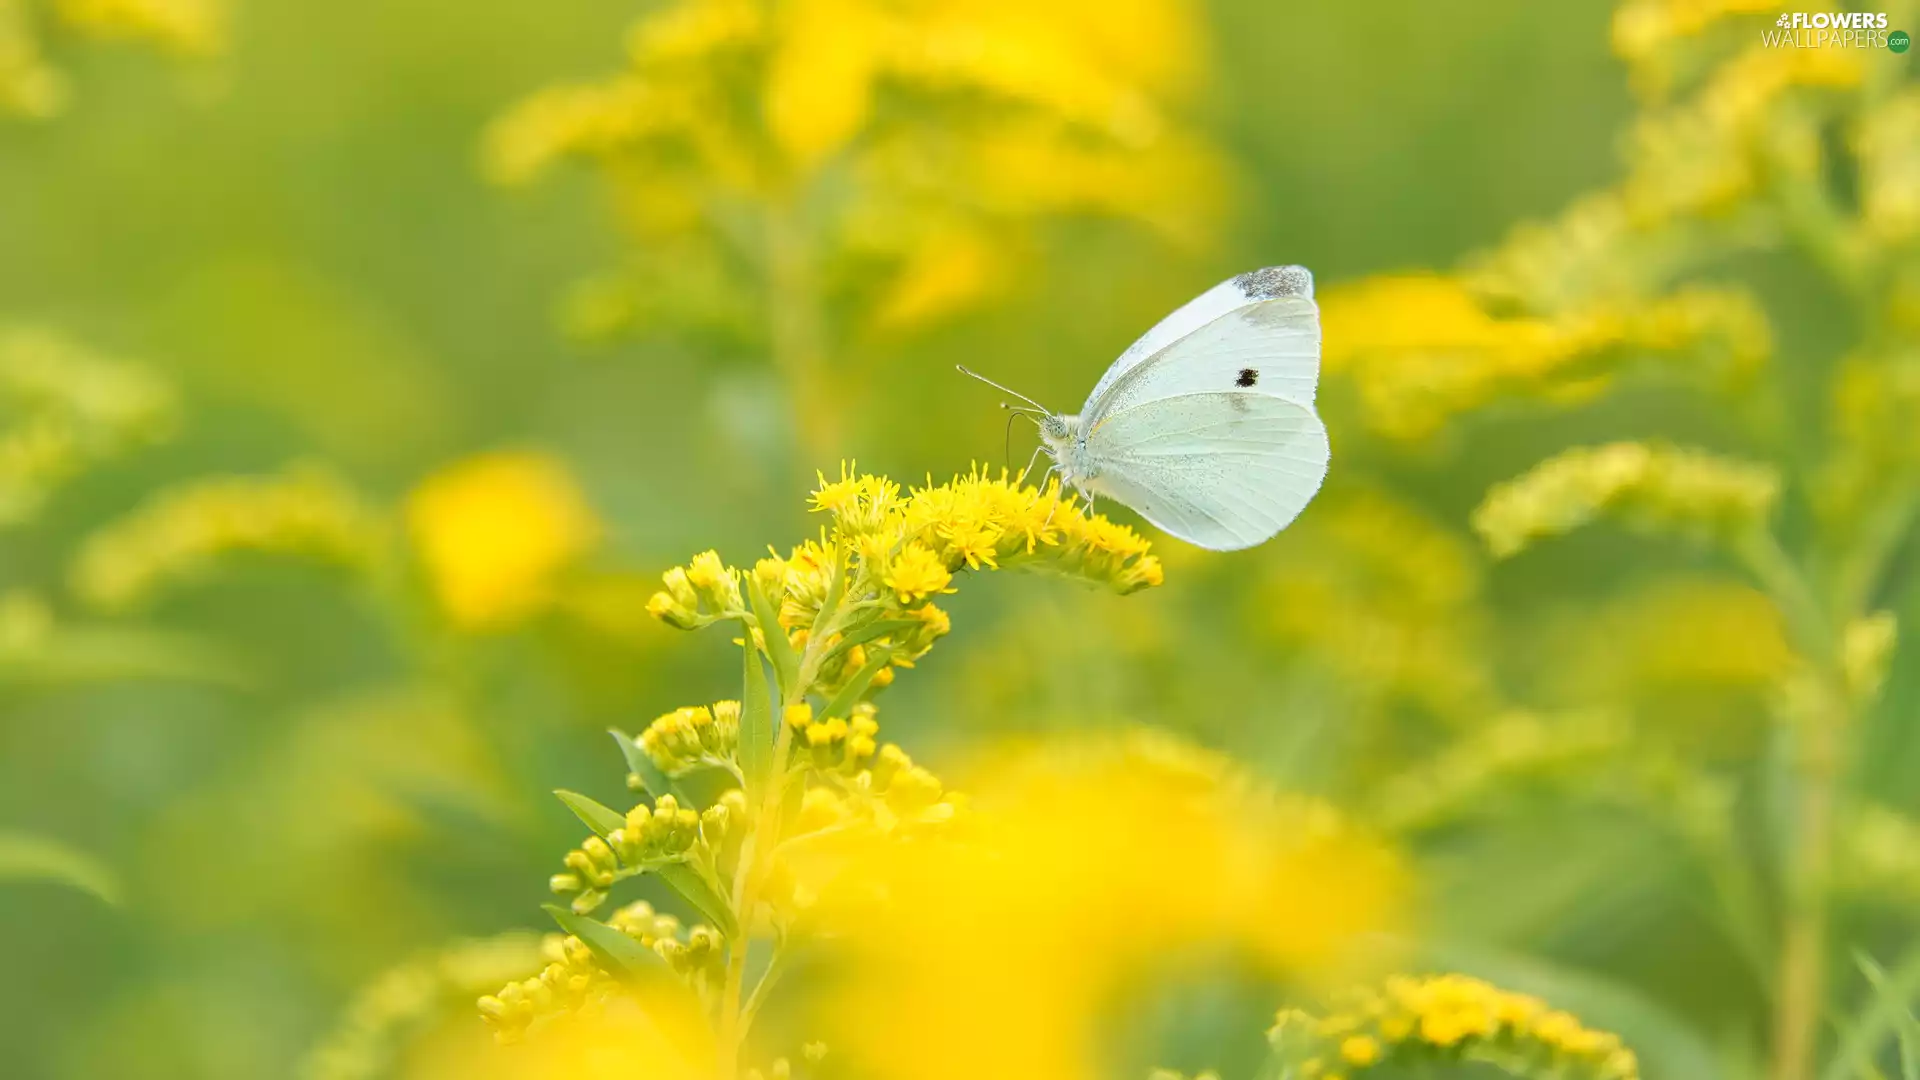 Cabbage Butterfly, White, plant, Goldenrod, Yellow Honda, butterfly